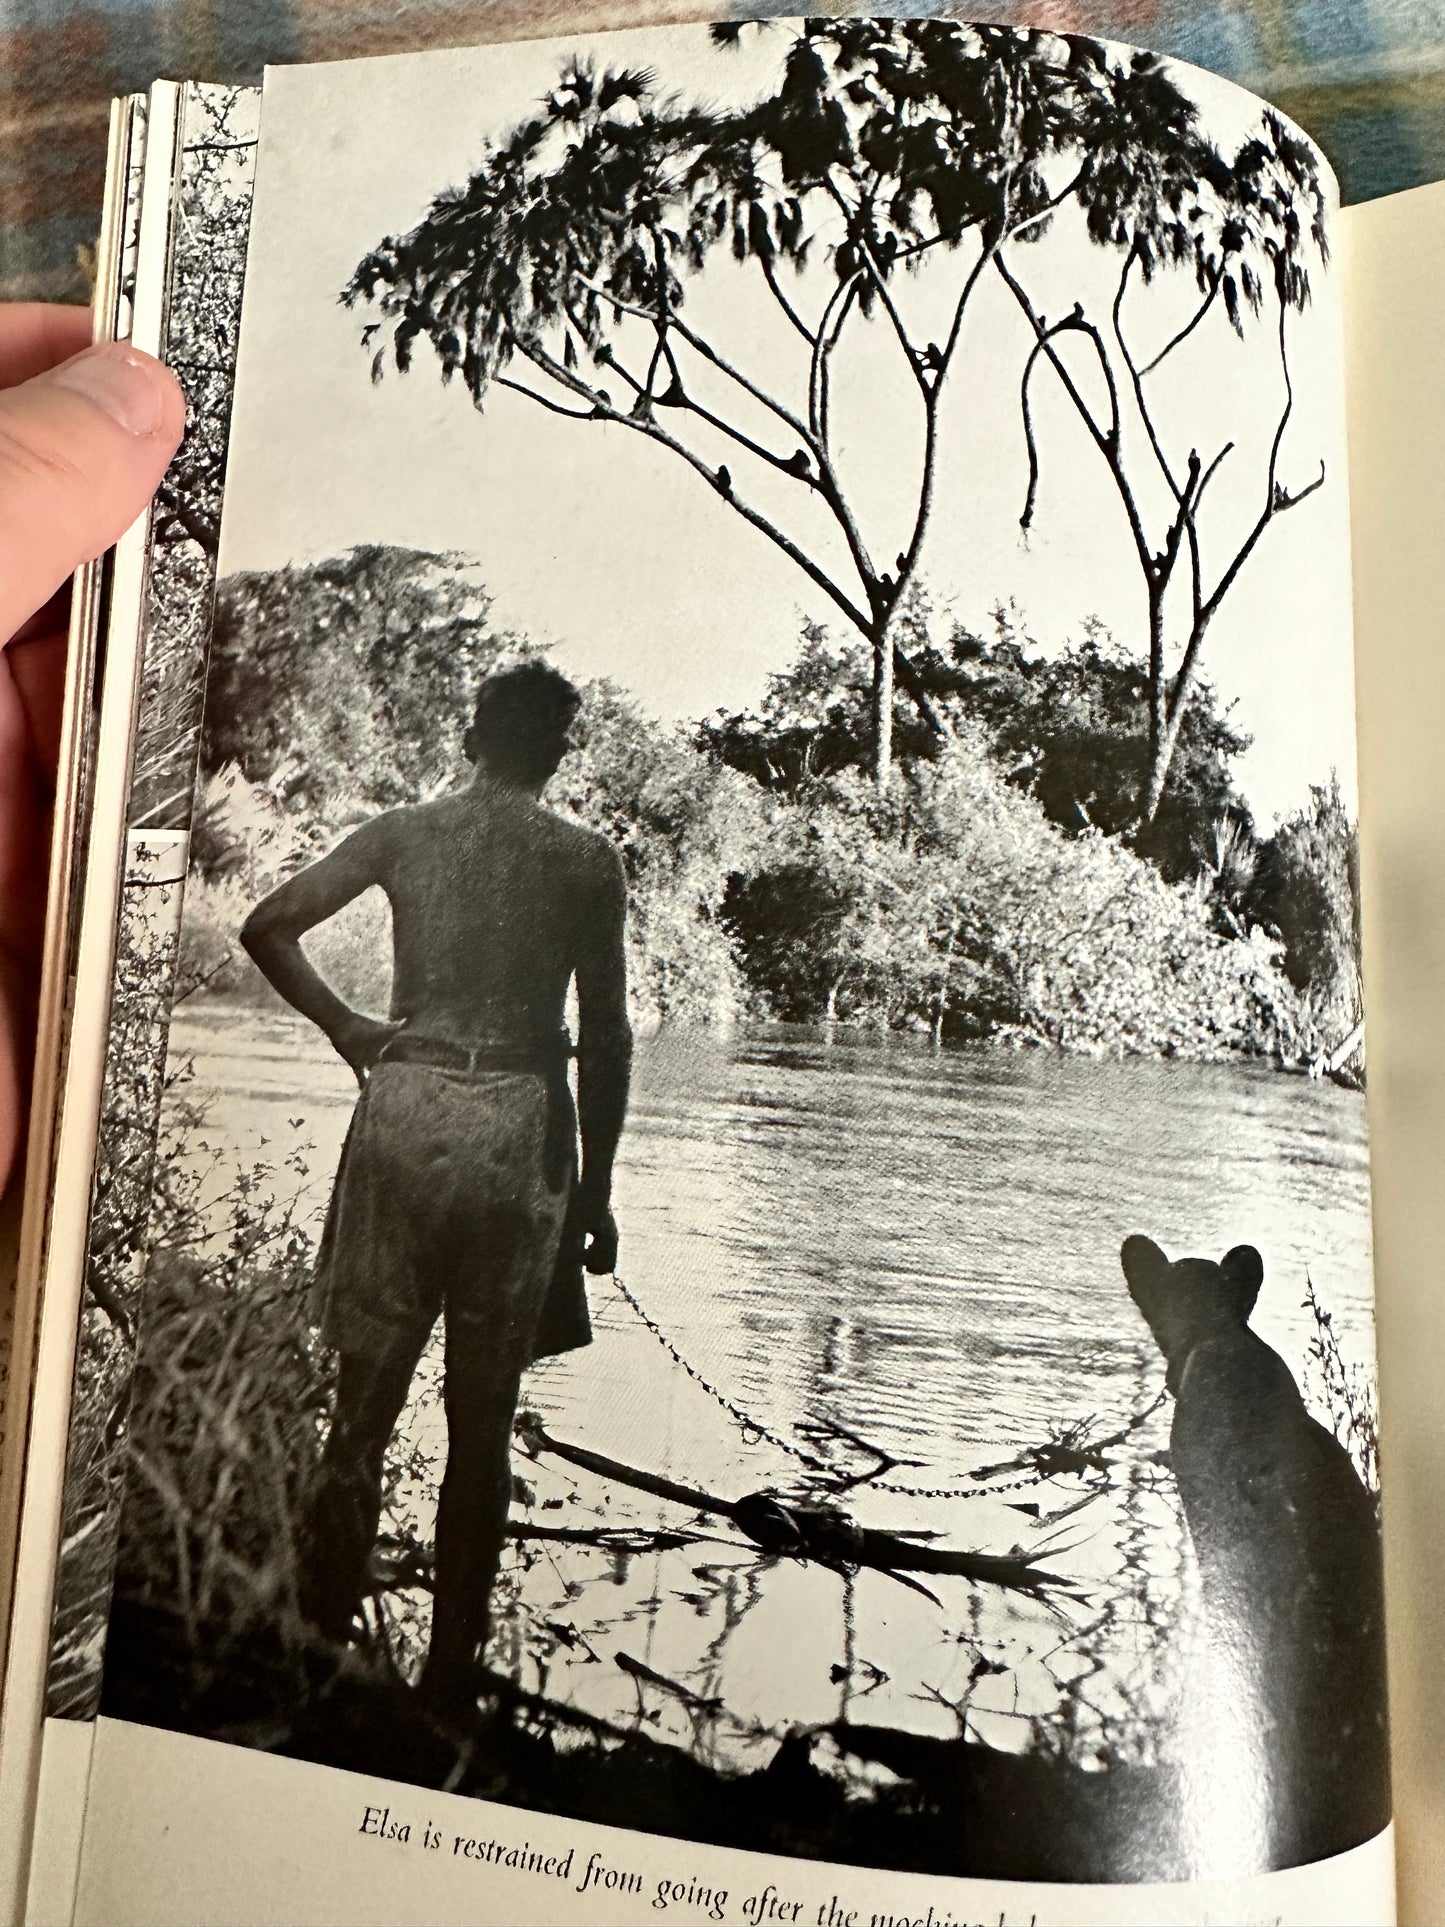 1960 Born Free(A Lioness of Two Worlds) - Joy Adamson(Collins/Harvill)